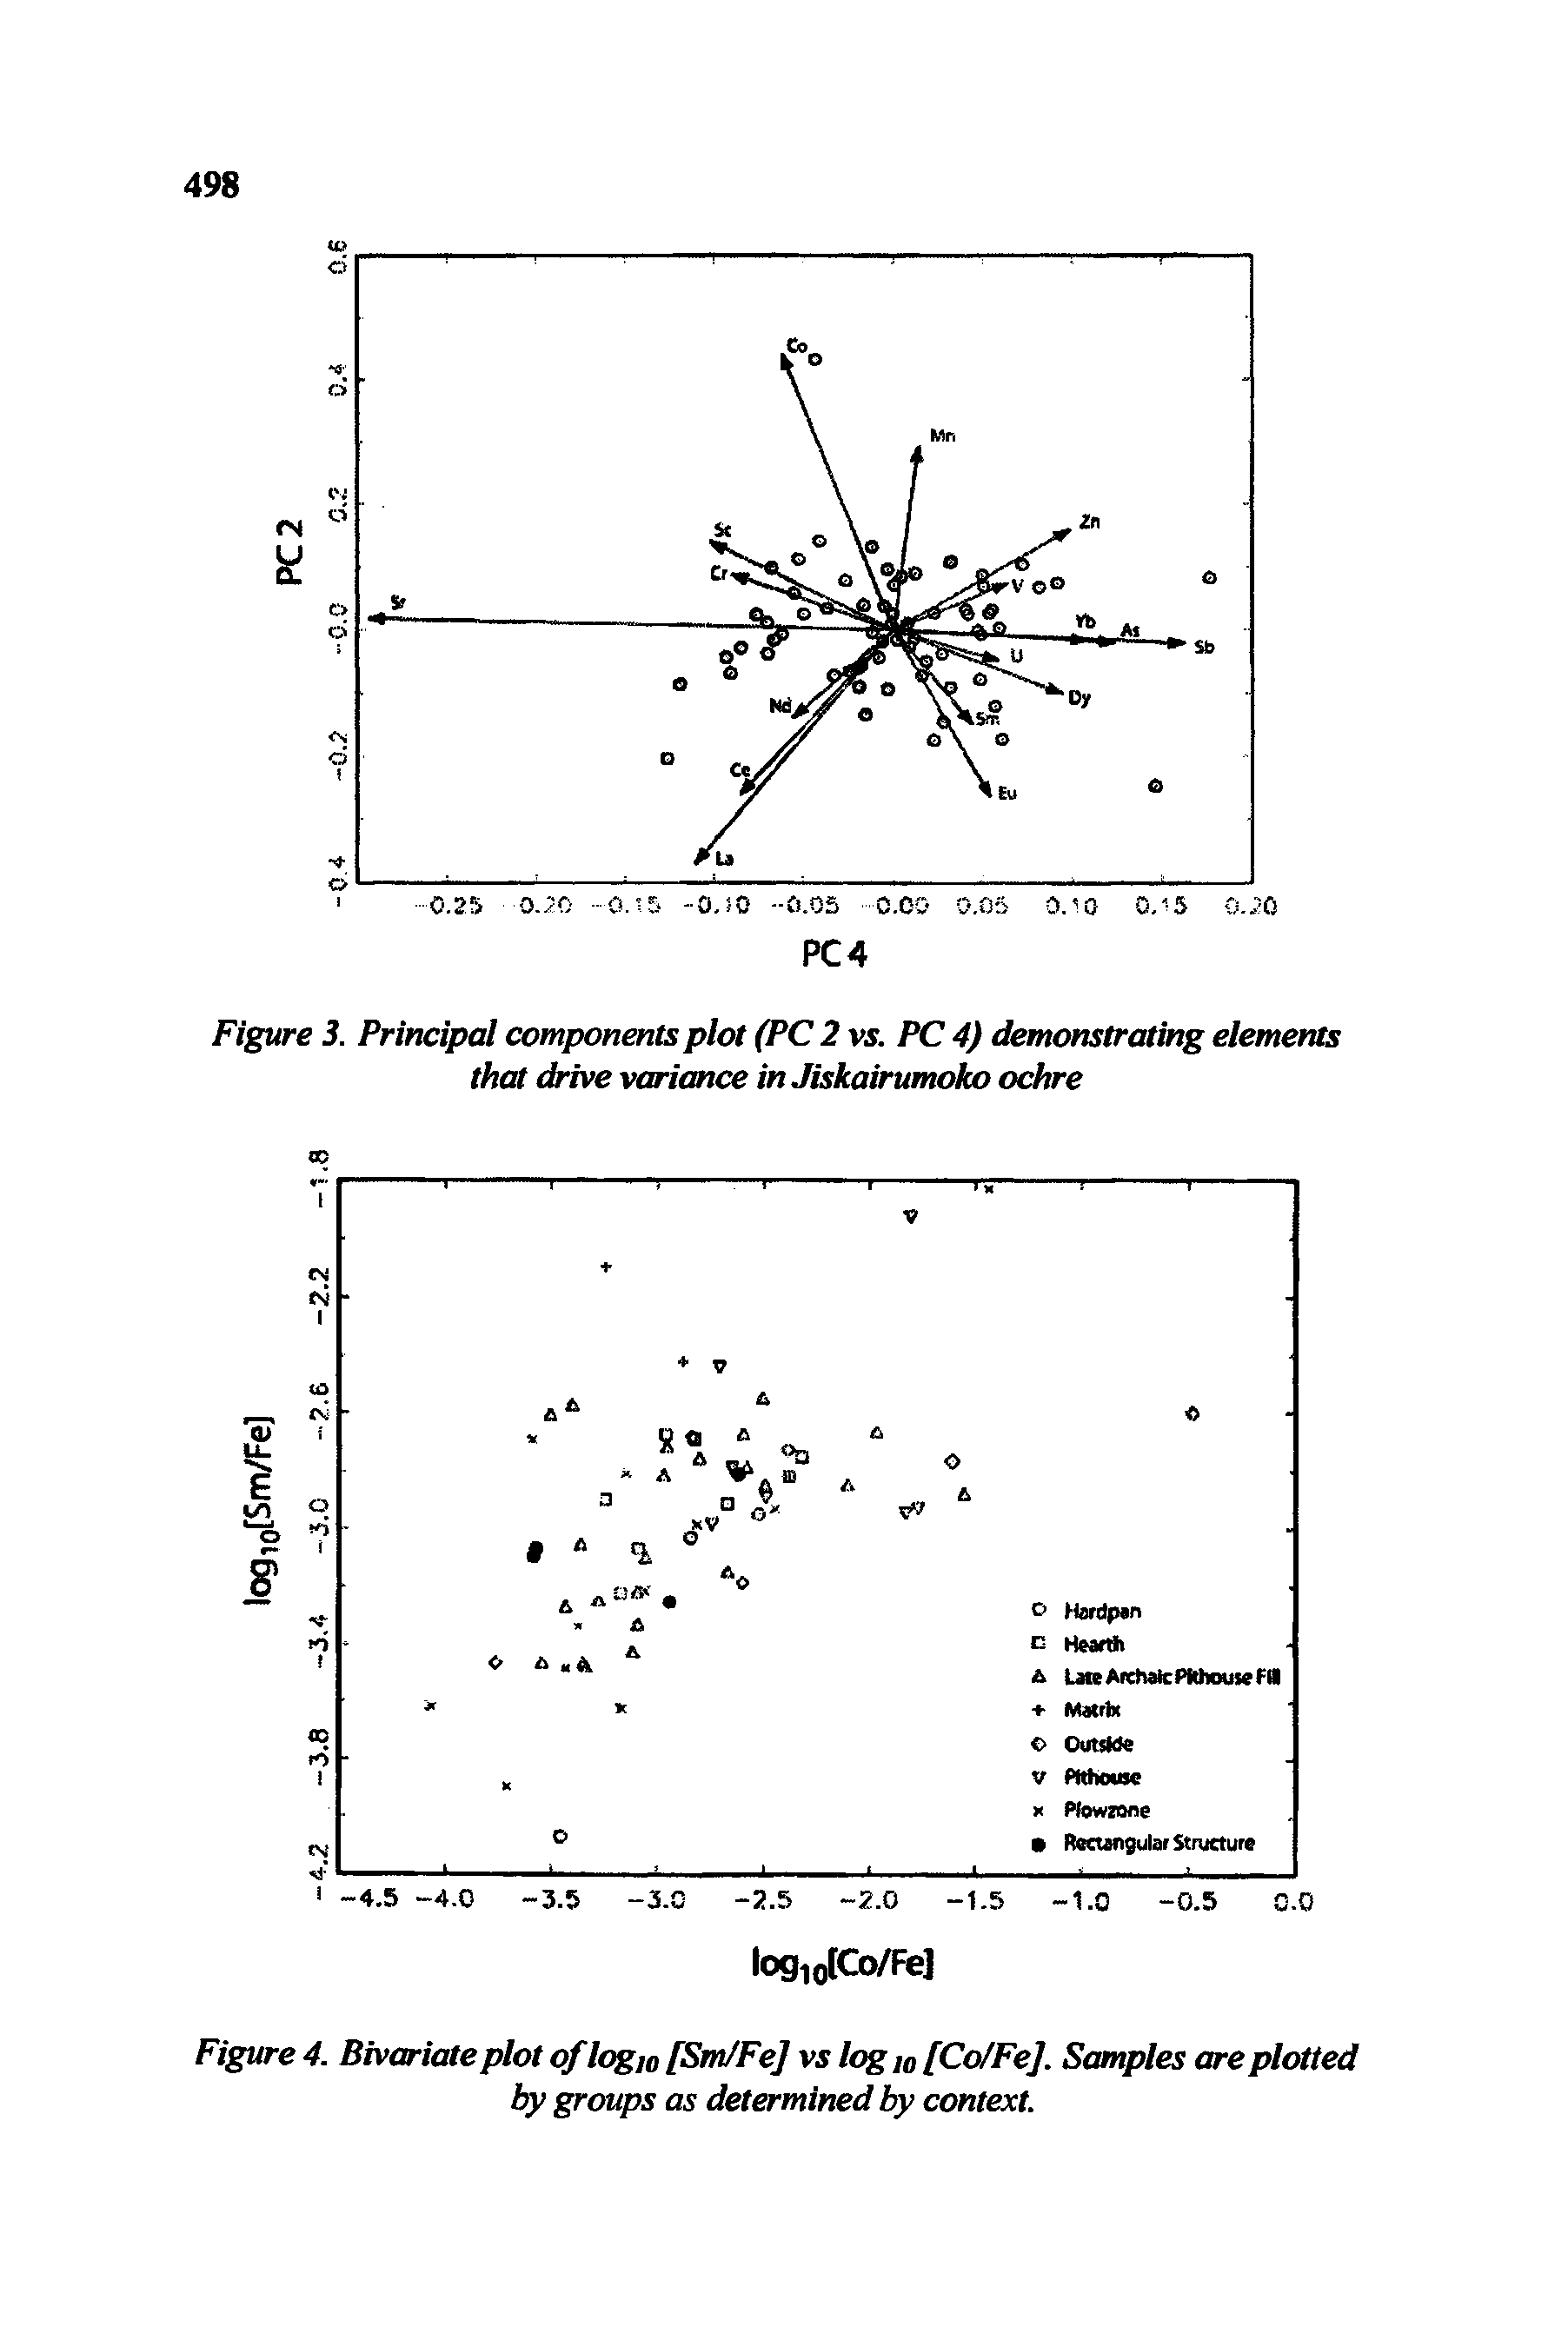 Figure 4. Bivariate plot oflogI0 [Sm/Fe] vs log I0 [Co/Fe]. Samples are plotted by groups as determined by context.